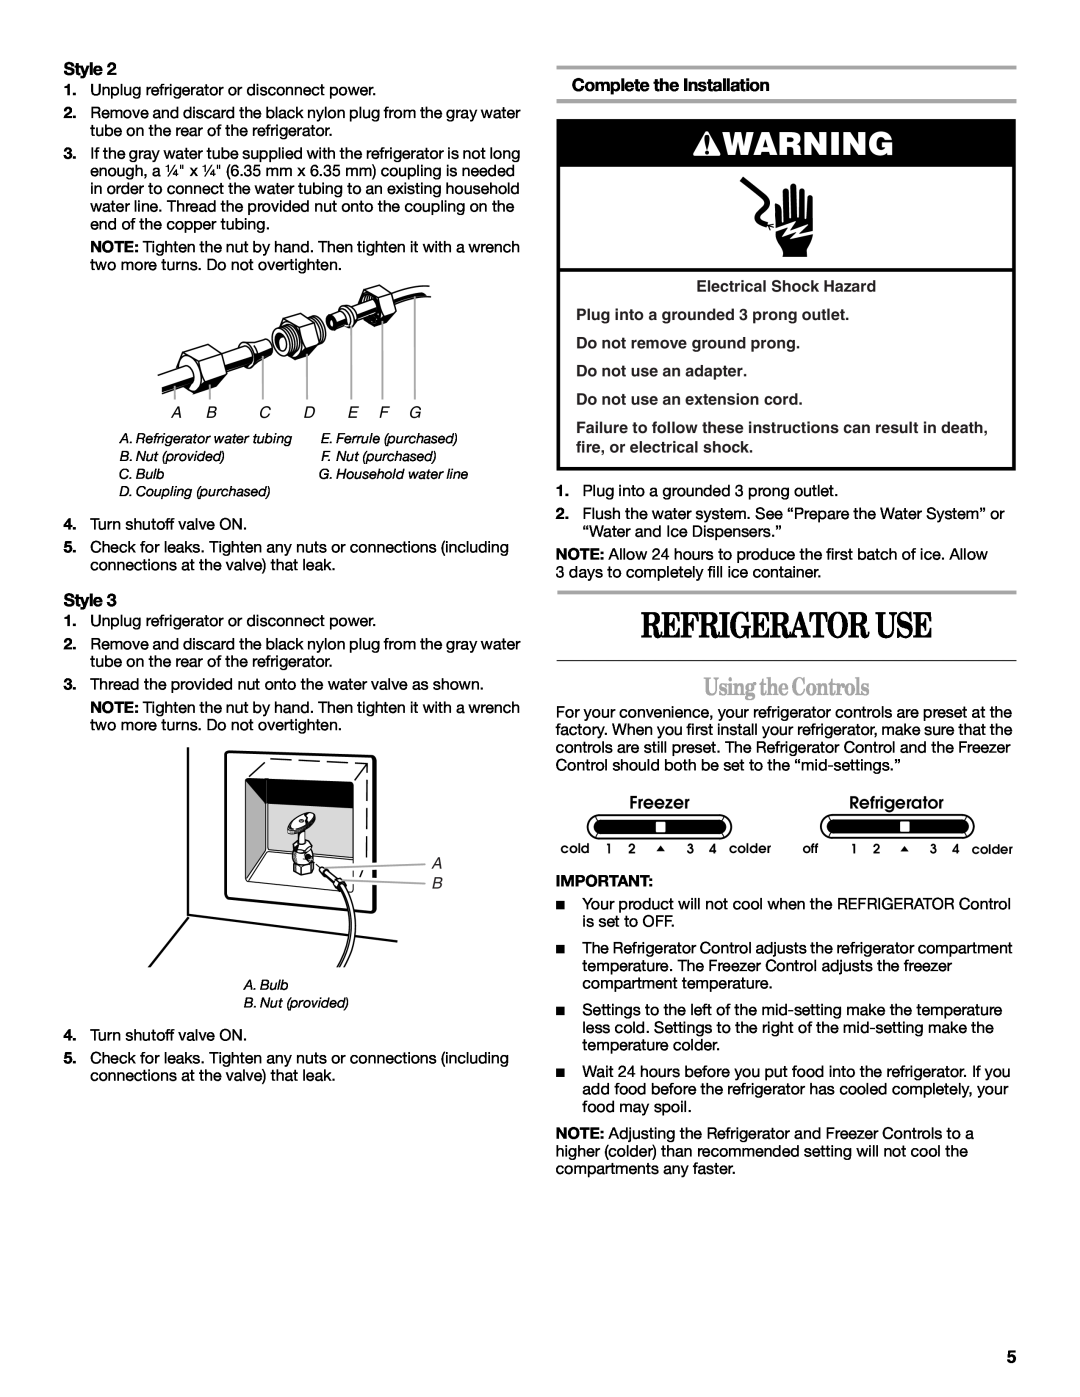 Whirlpool ED2KHAXV installation instructions Refrigerator Use, Using theControls, Style, Complete the Installation, E F G 